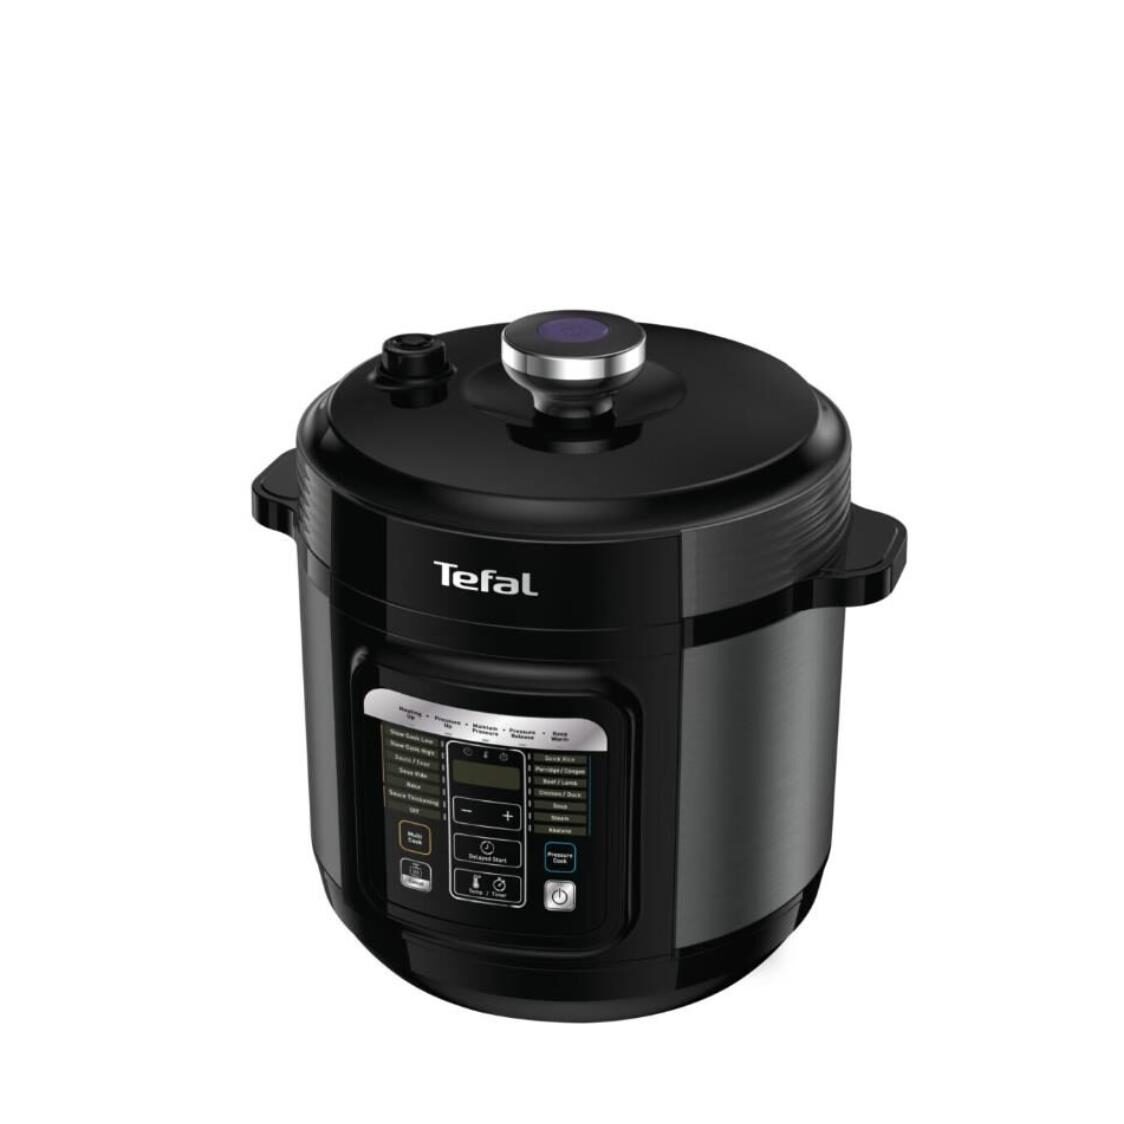 Tefal Easy Express Multi Cooker 6L CY601